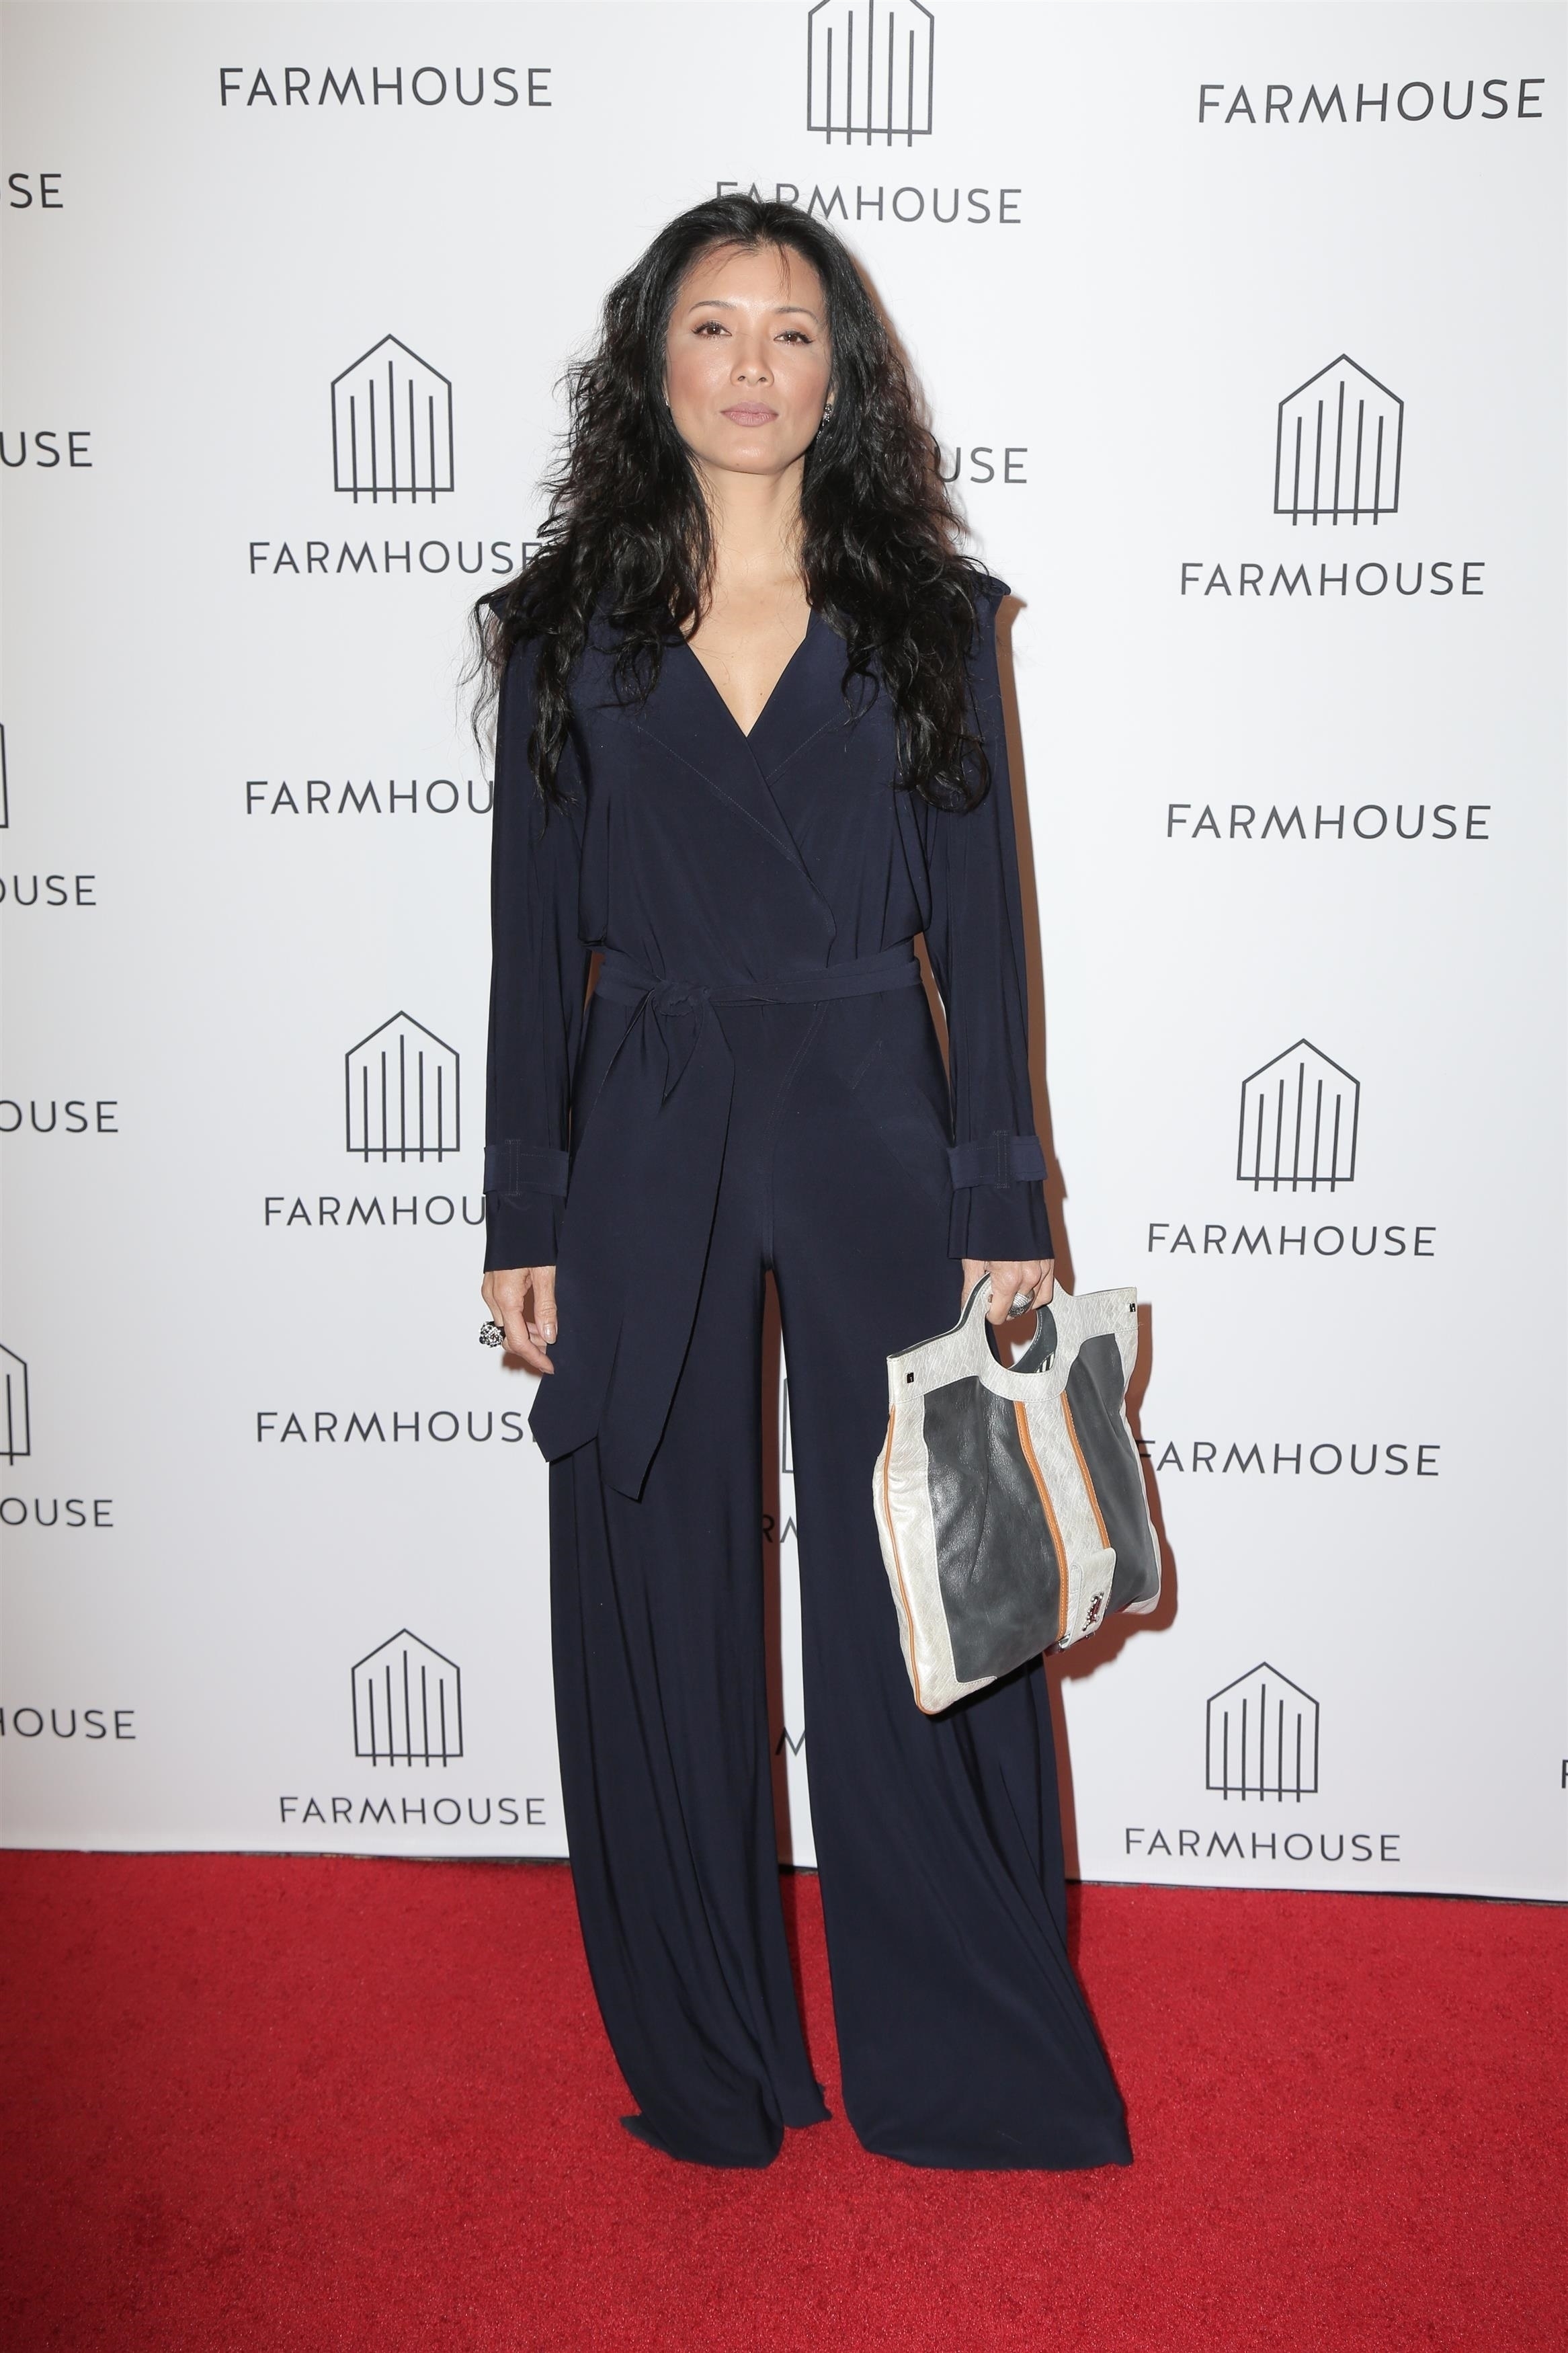 kelly-hu-grand-opening-of-farmhouse-held-at-the-beverly-center-31518-5.jpg